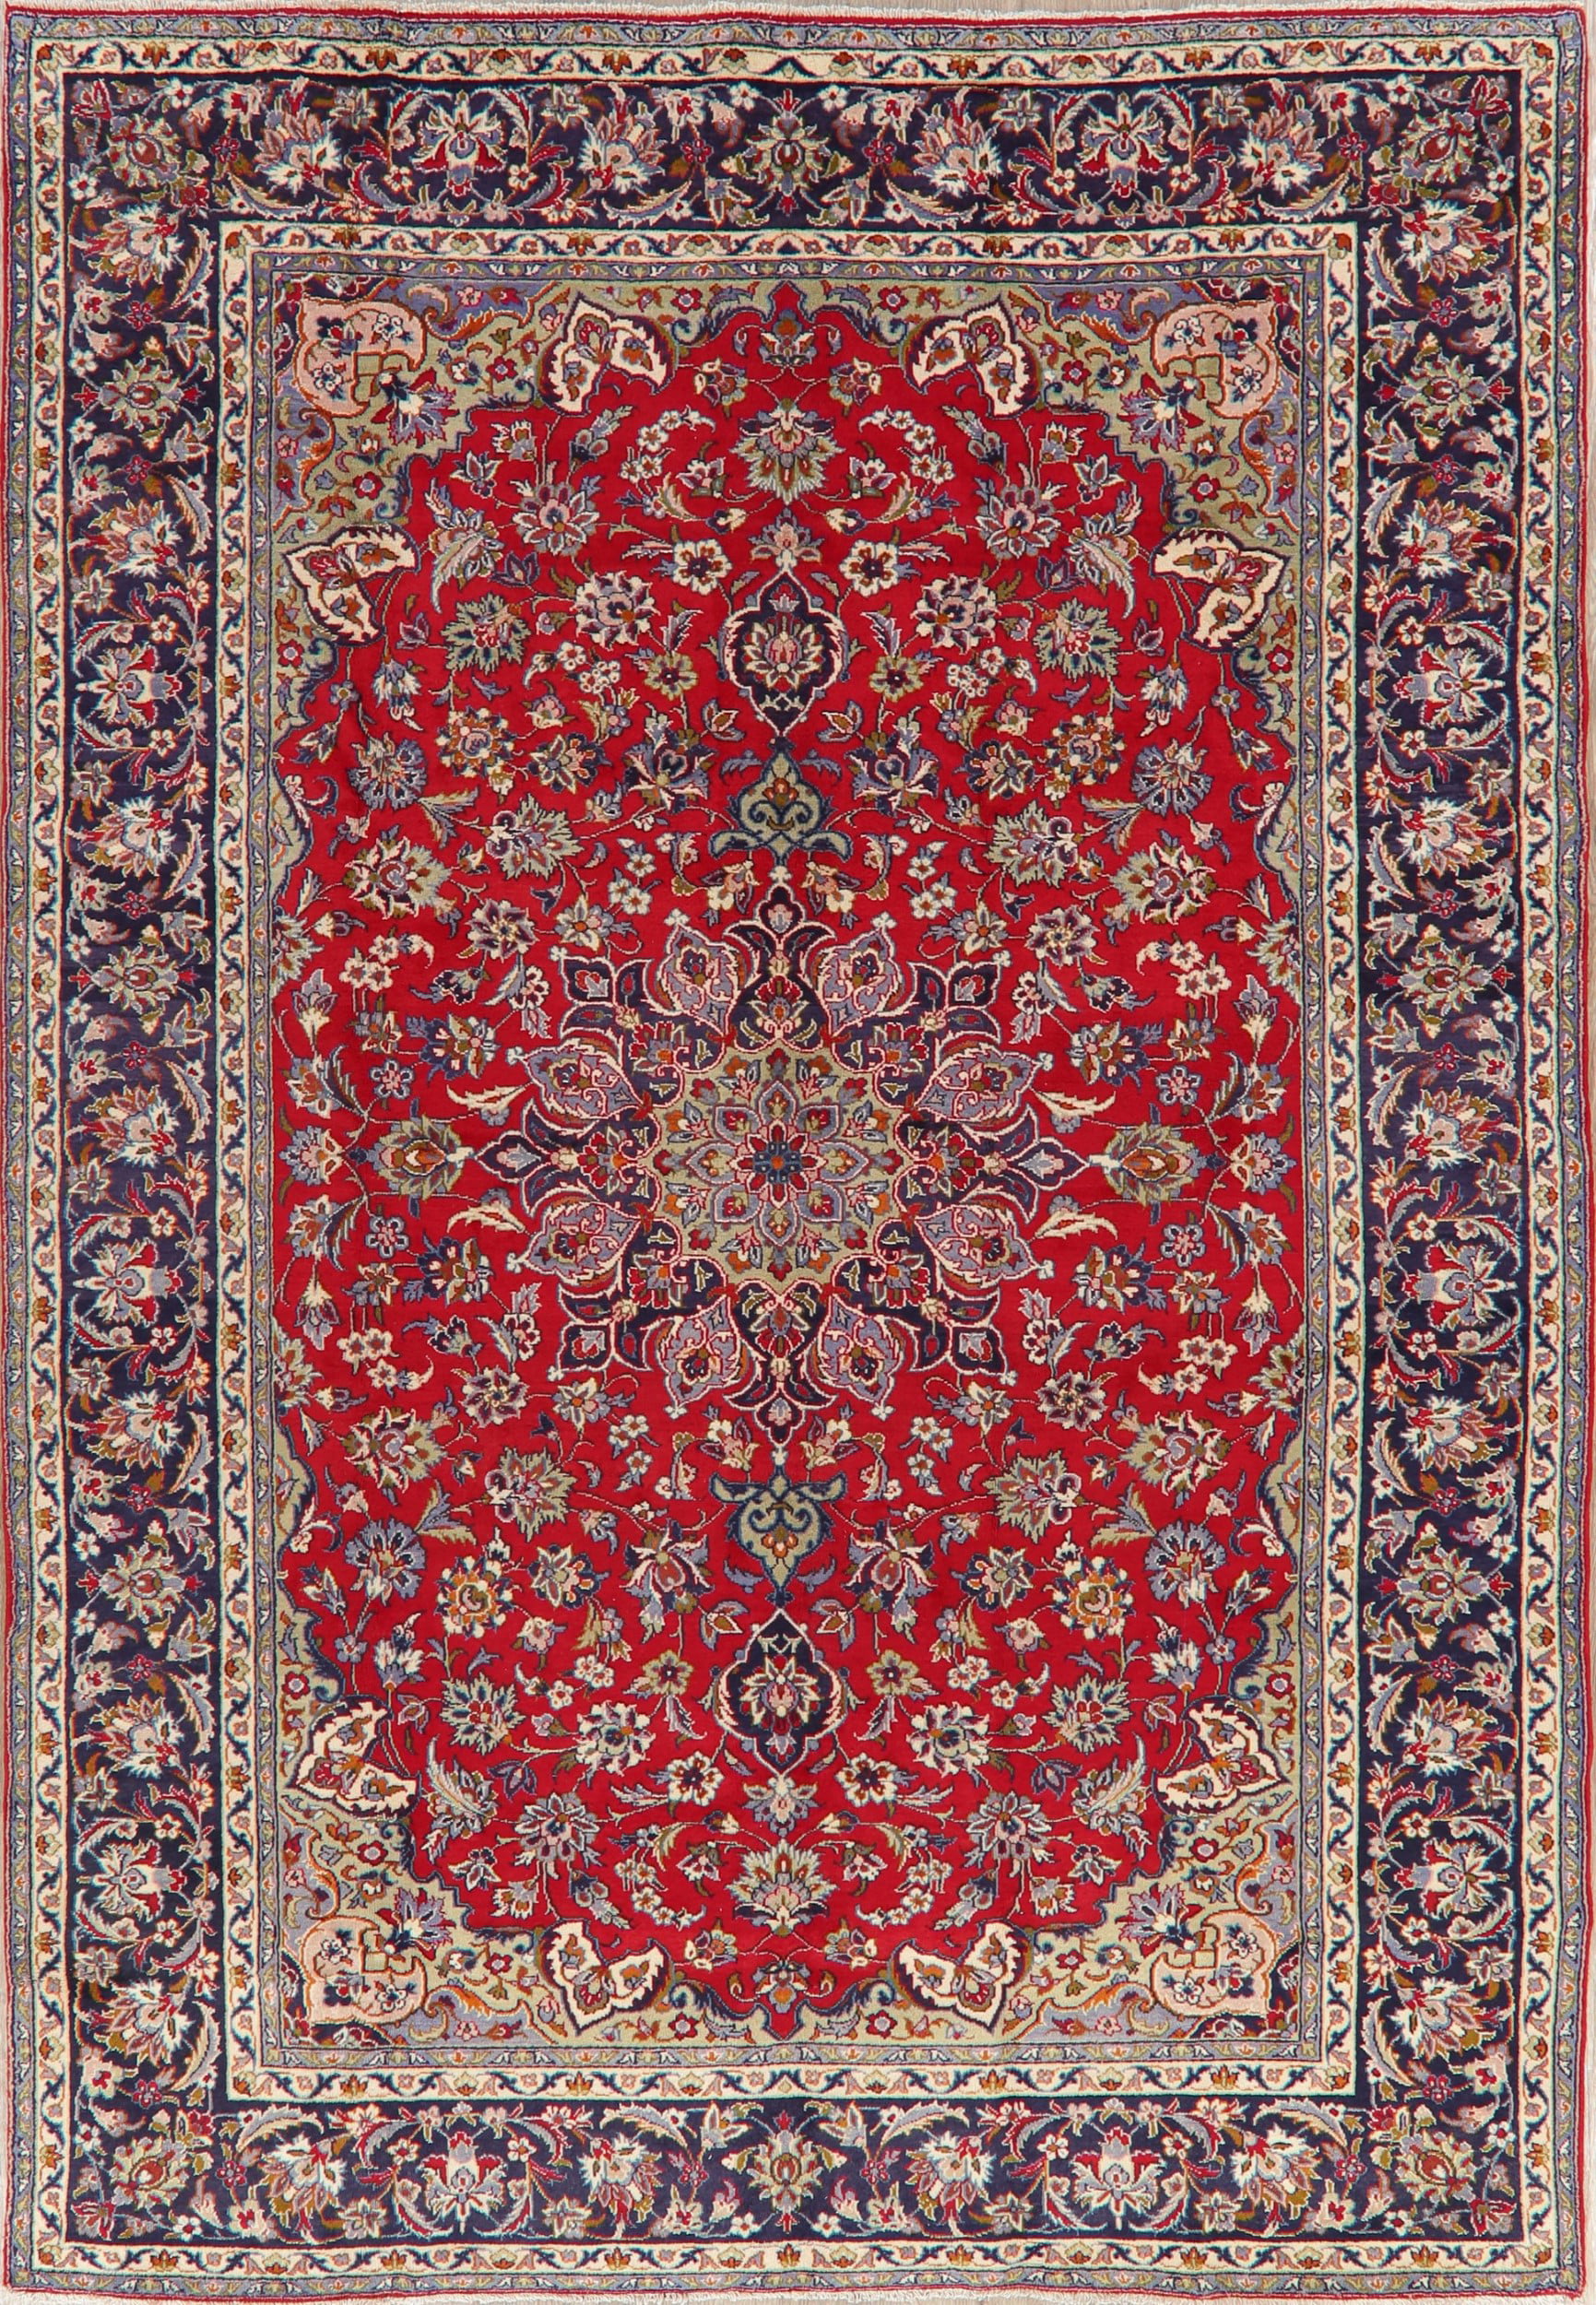 BLACK FRIDAY DEAL Traditional Floral Najafabad Oriental Handmade Area Rug Red Wool Carpet 8x12 ...